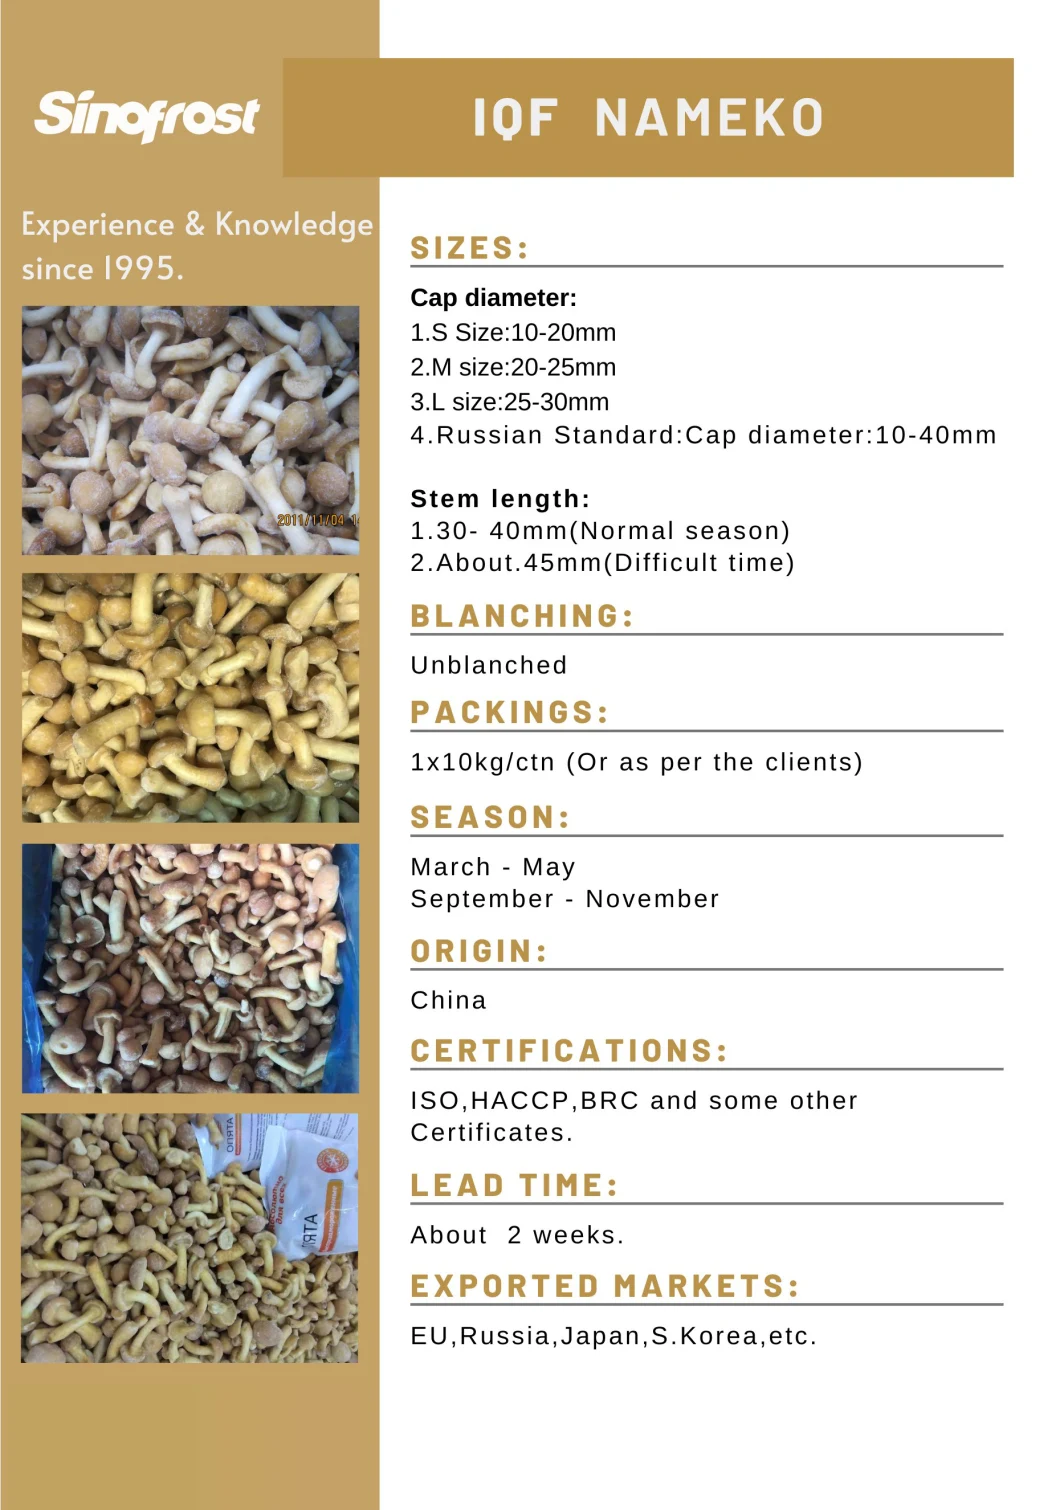 New Crop,IQF Nameko Mushrooms,IQF Champignon Mushrooms,IQF Shiitakes,IQF Black Fungus,IQF Oyster Mushrooms,Slices/Wholes/Cuts/Strips,Blanched/Unblanched/Cooked